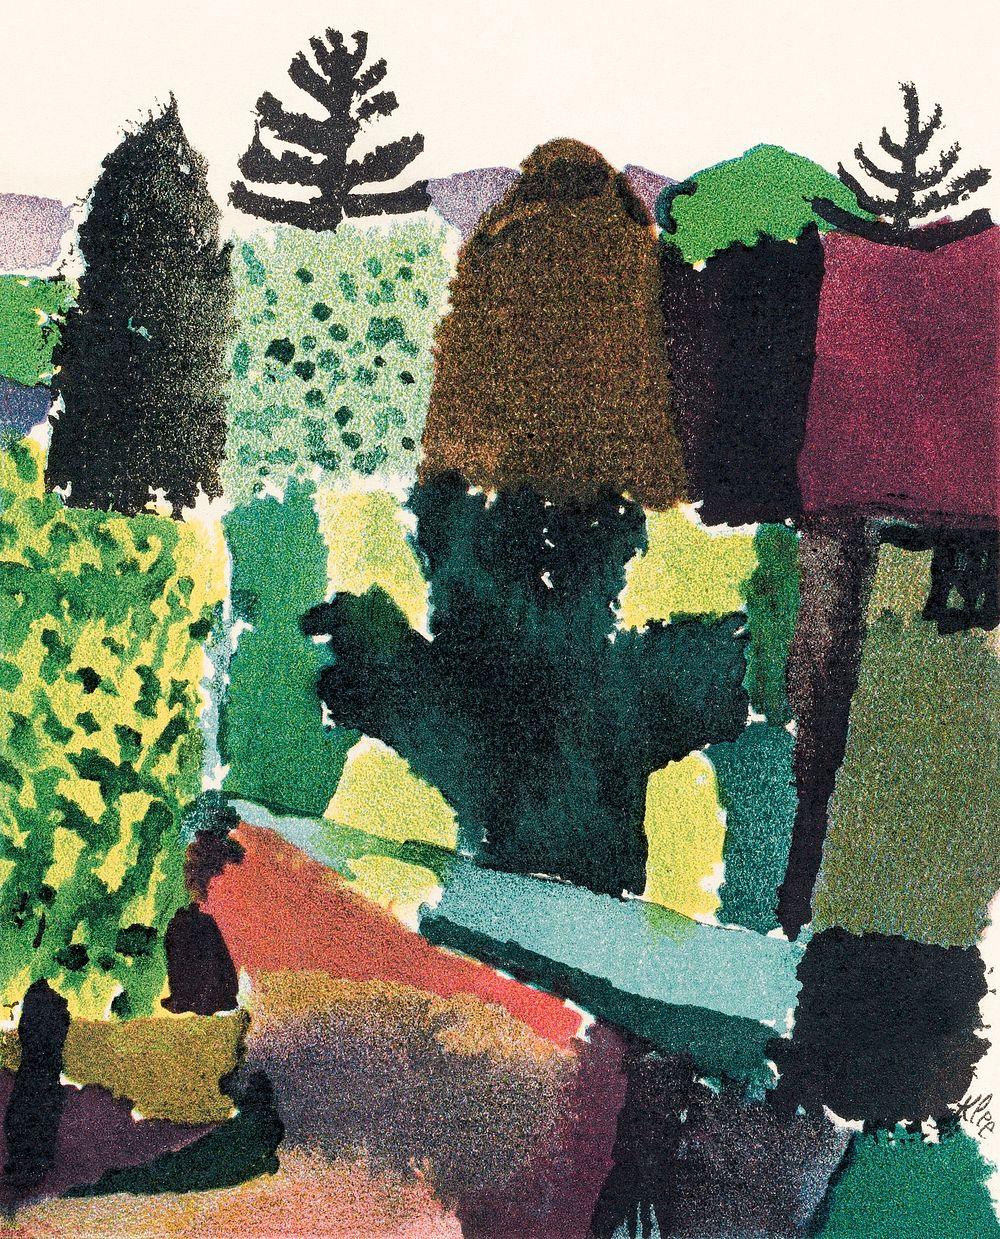 Park (1920) by Paul Klee. Original portrait painting from The Art Institute of Chicago. Digitally enhanced by rawpixel.